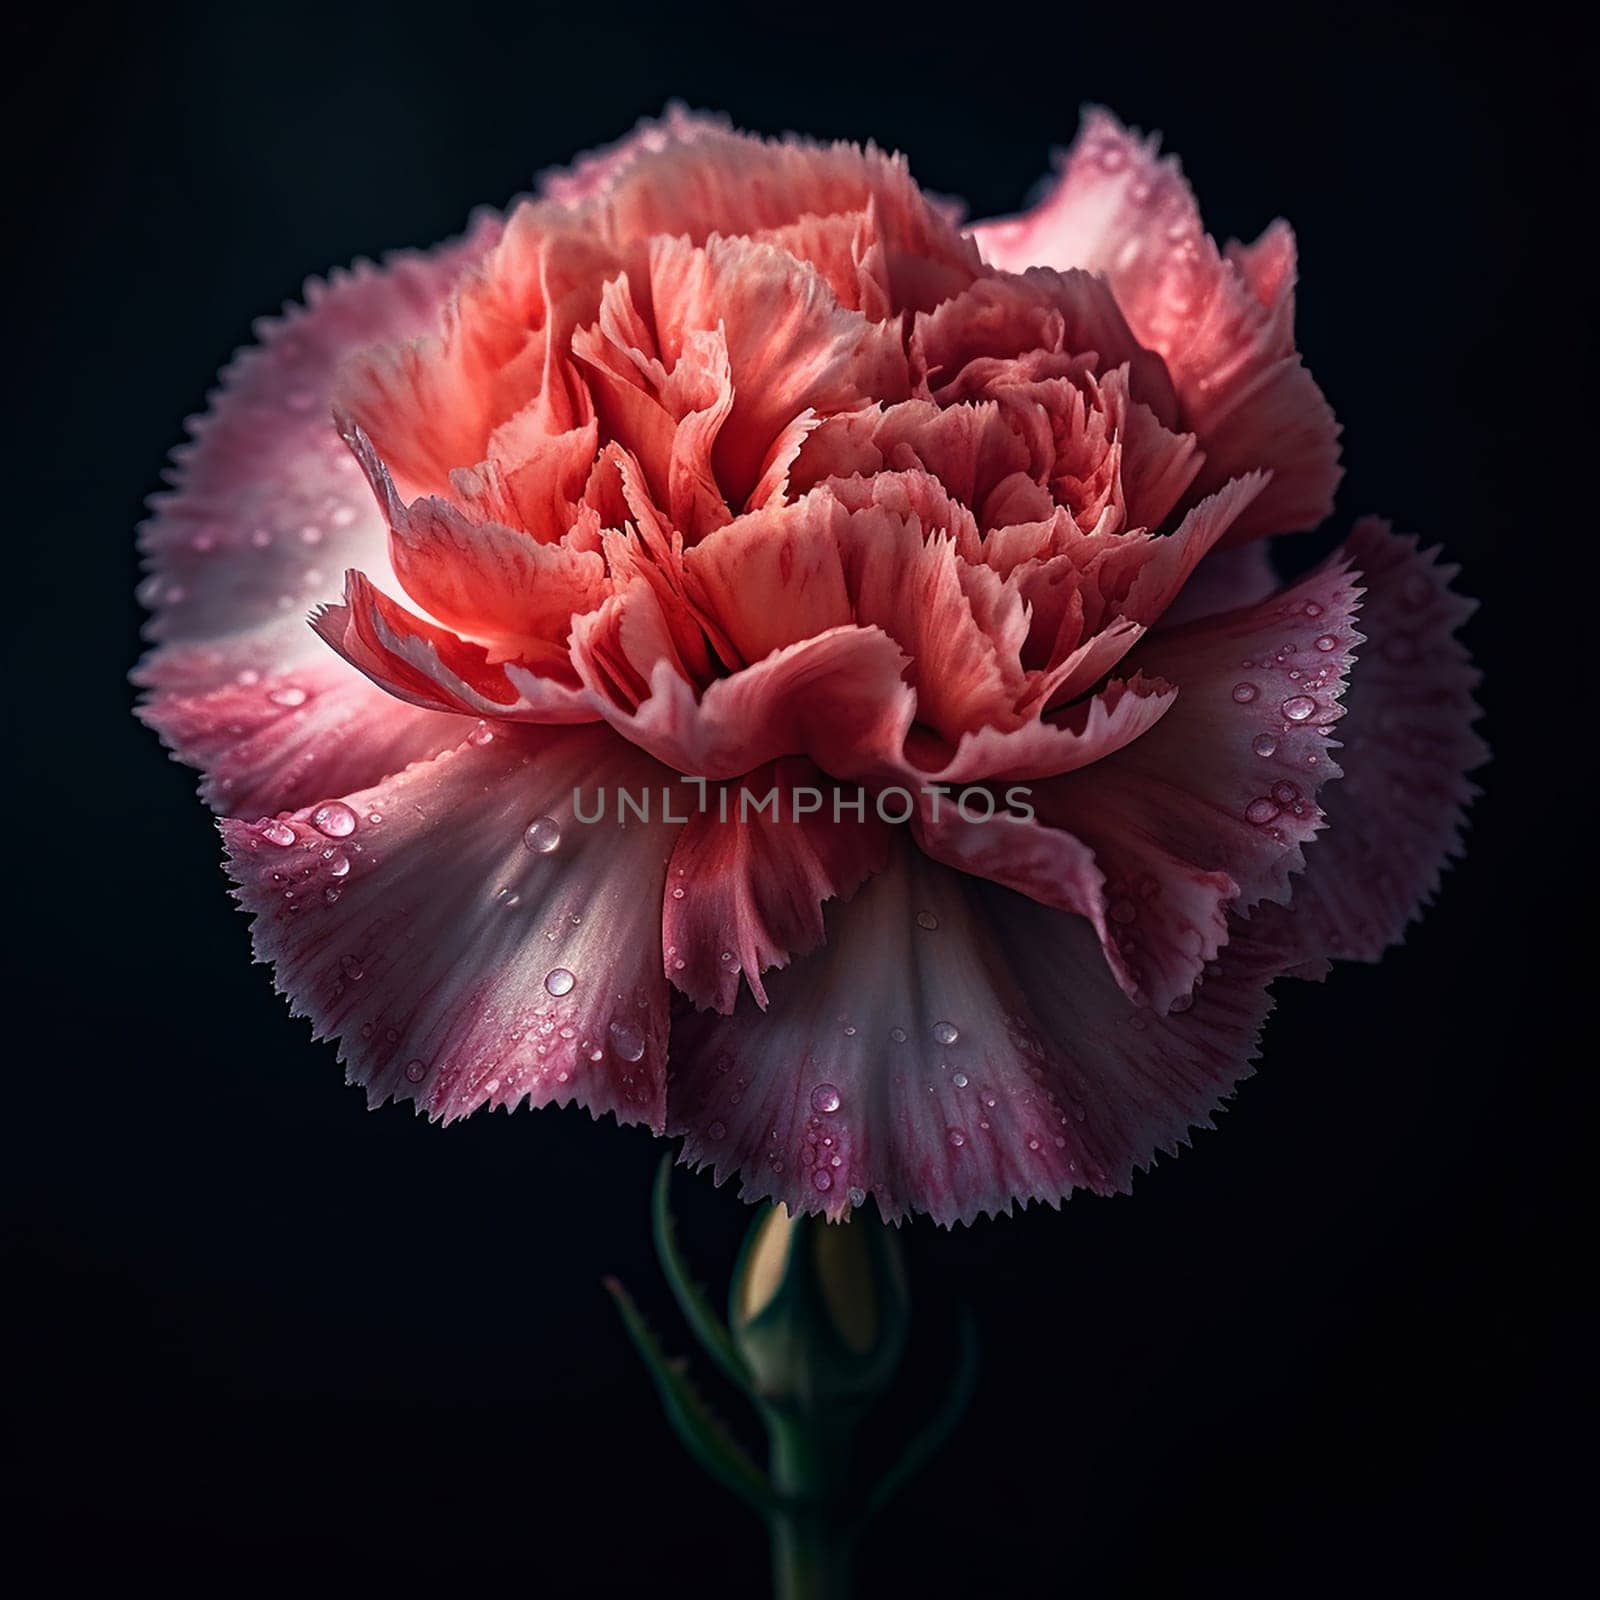 Close up of a dew kissed, pink carnation against a dark background by Hype2art